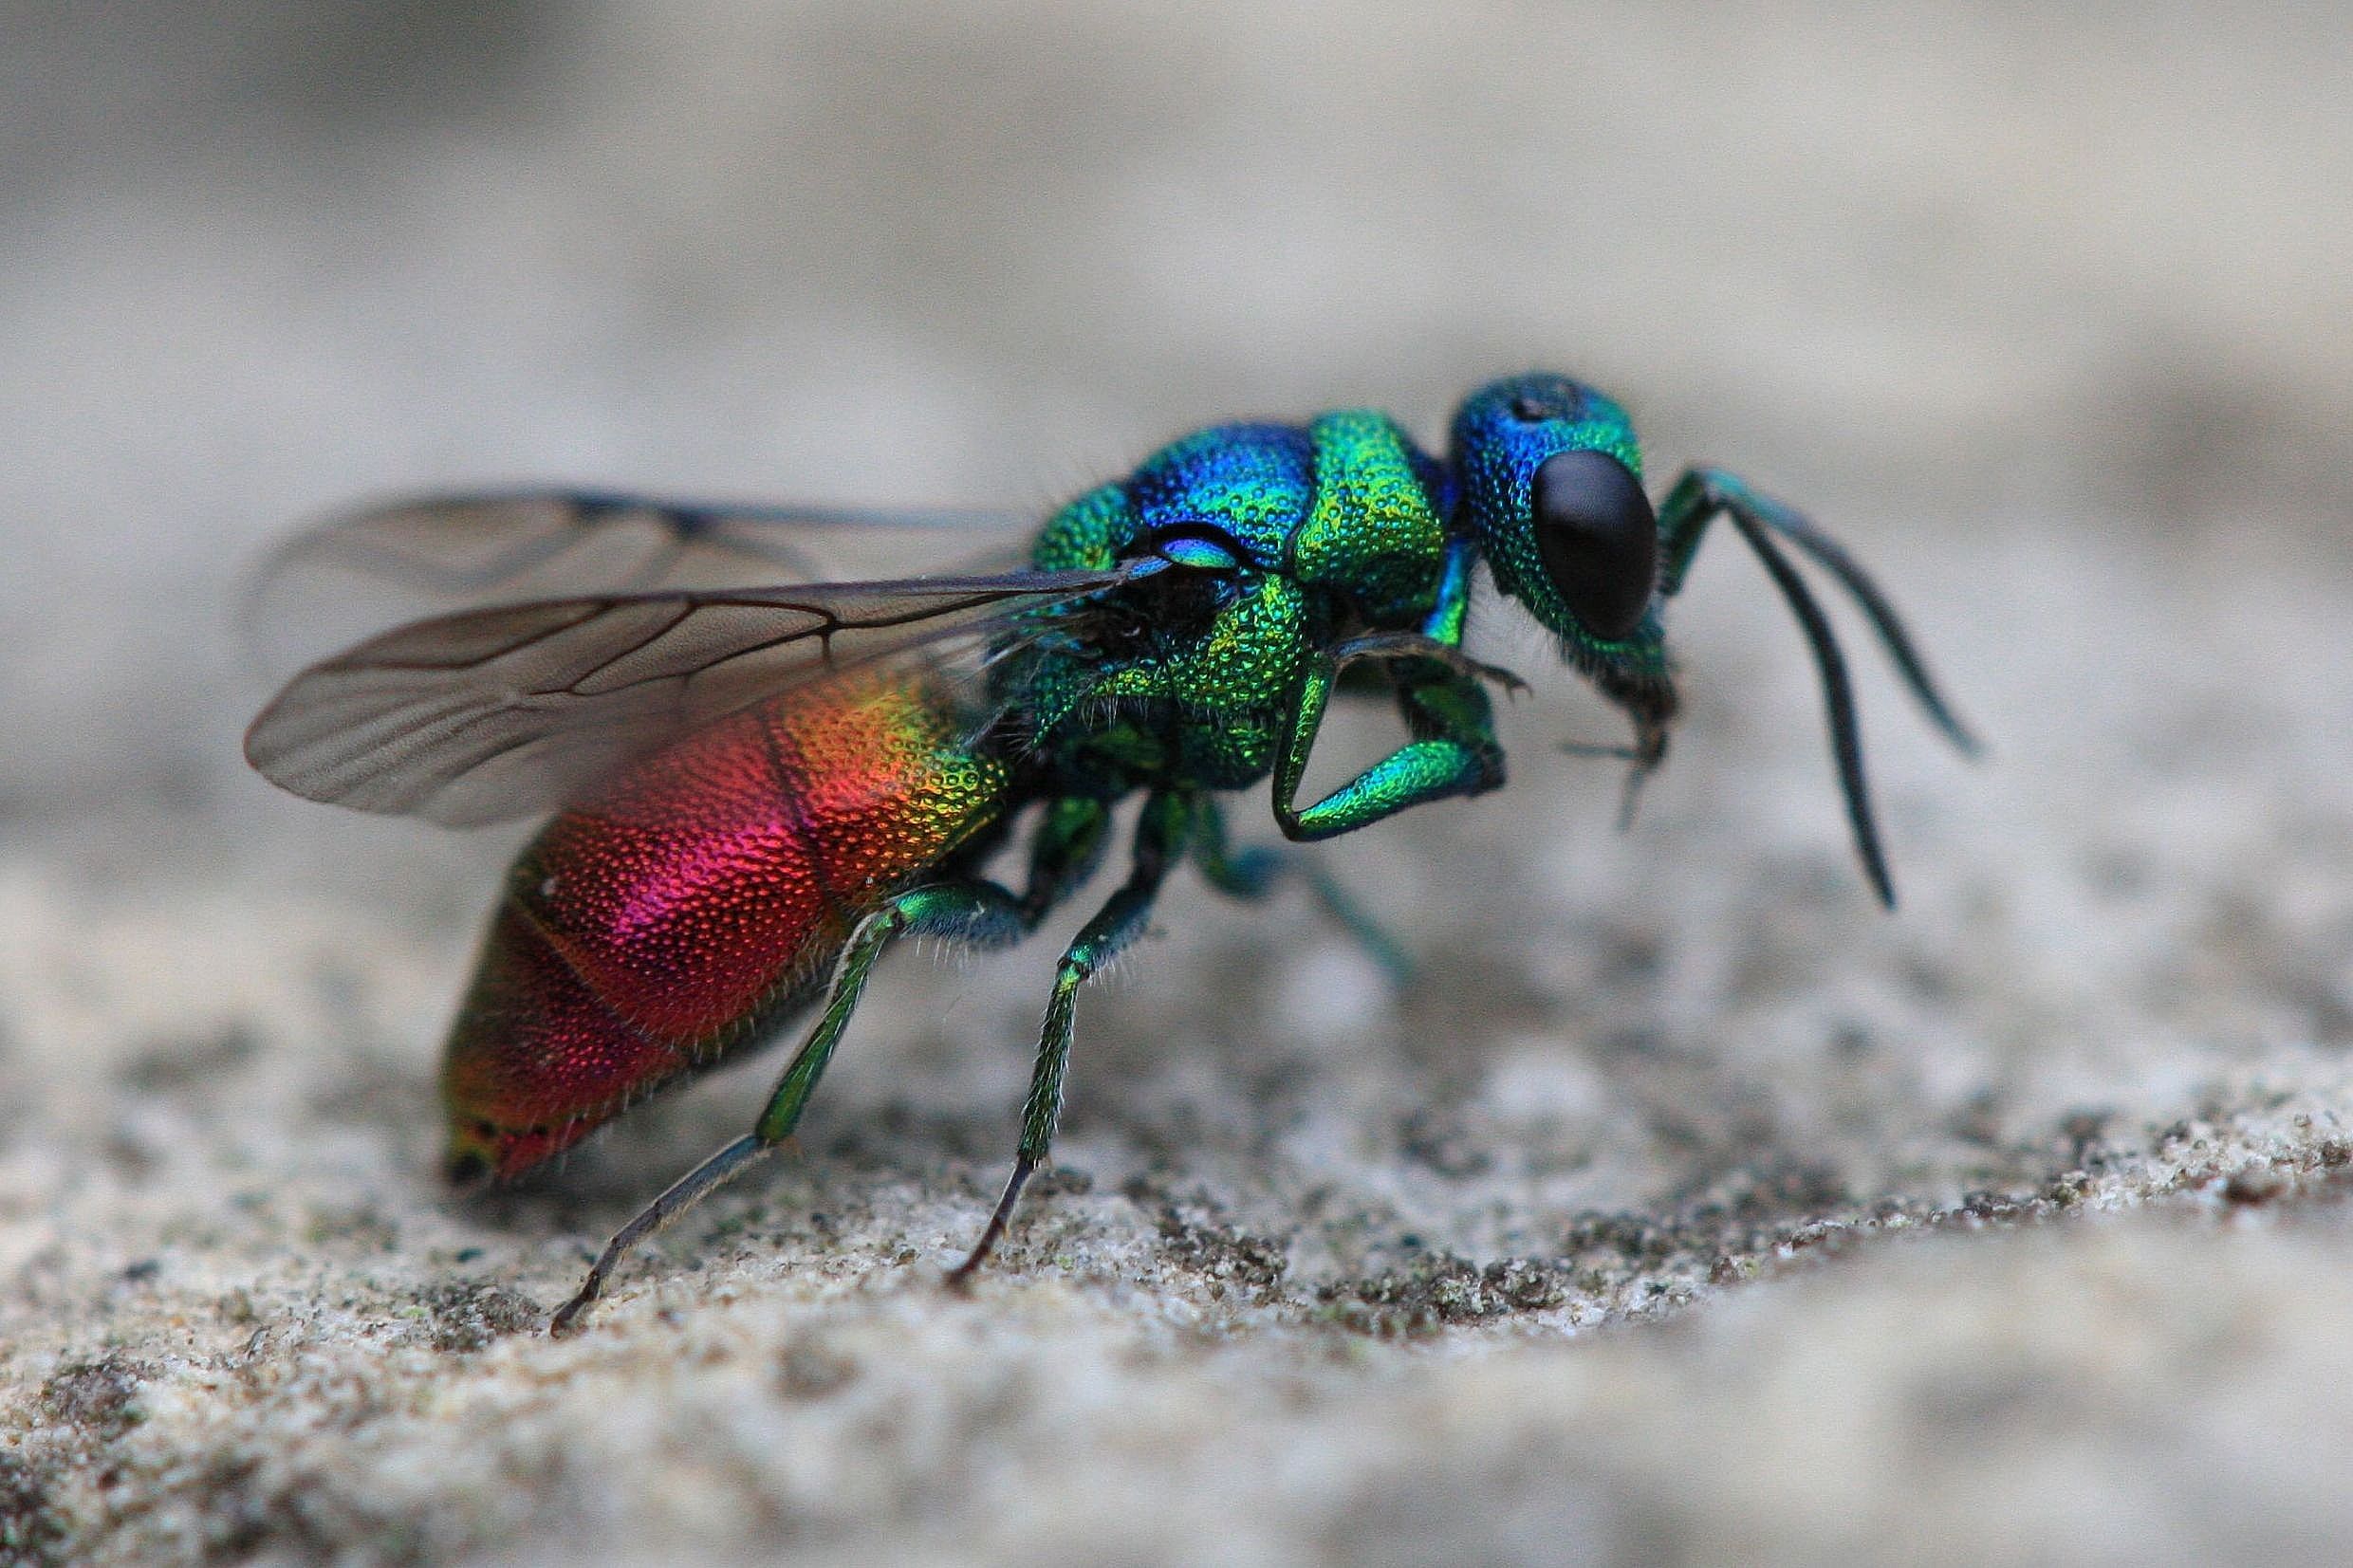 Chrysis ignita - Ruby Tail or Cuckoo Wasp | Butterflies & Insects ...